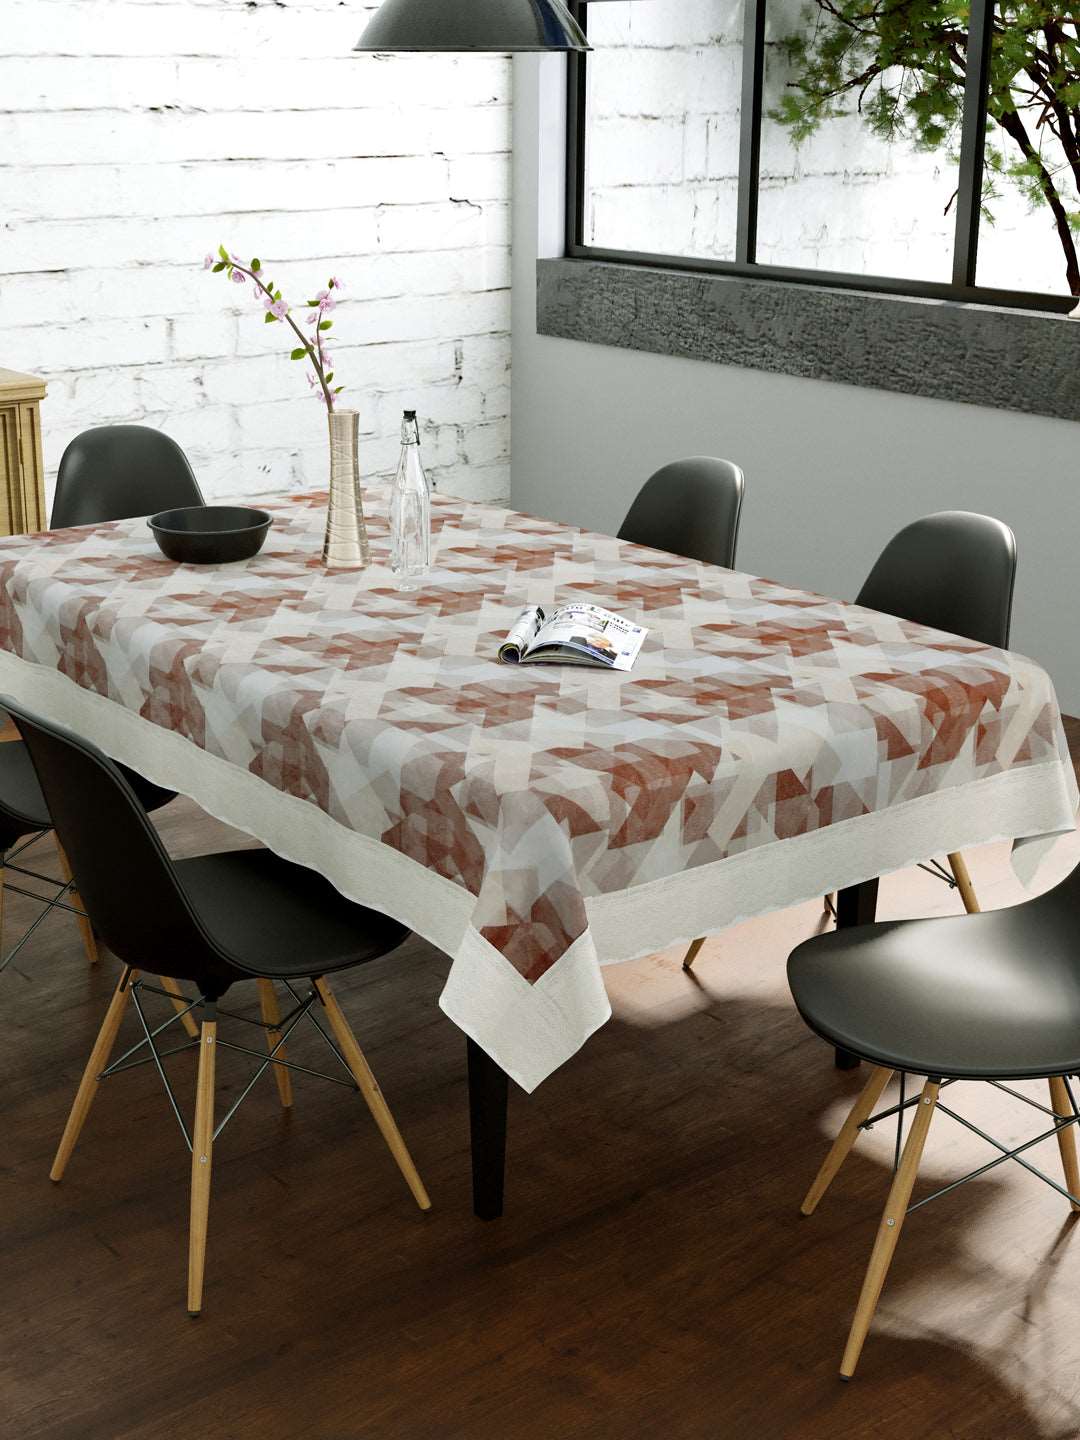 6 Seater Dining Table Cover; Material - PVC; Anti Slip; Brown & Beige